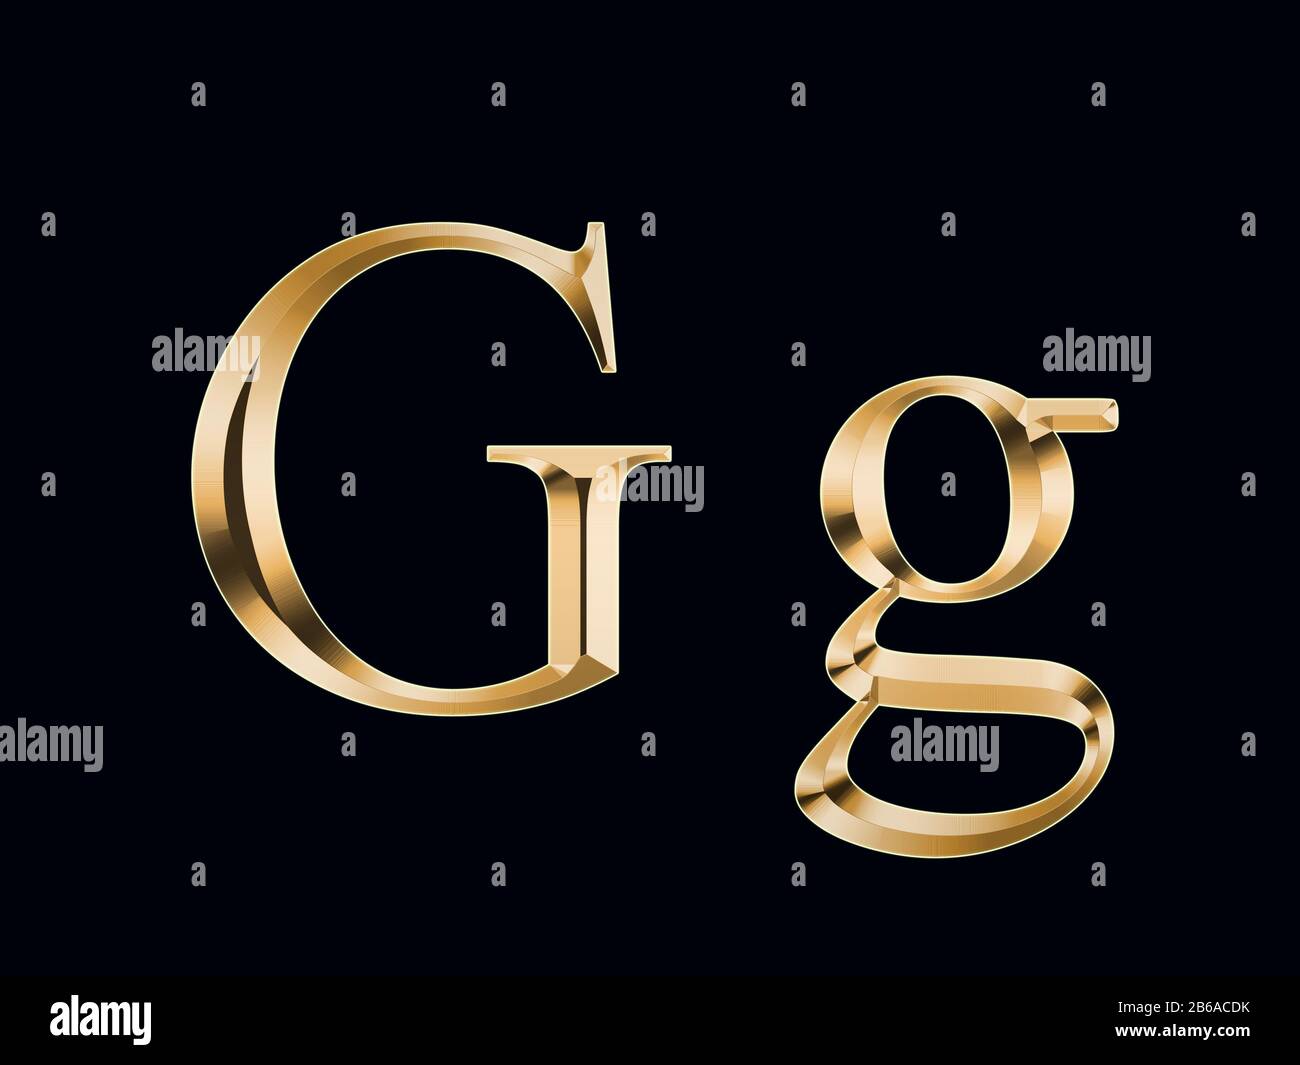 Gold letter 'G' on a black background Stock Photo